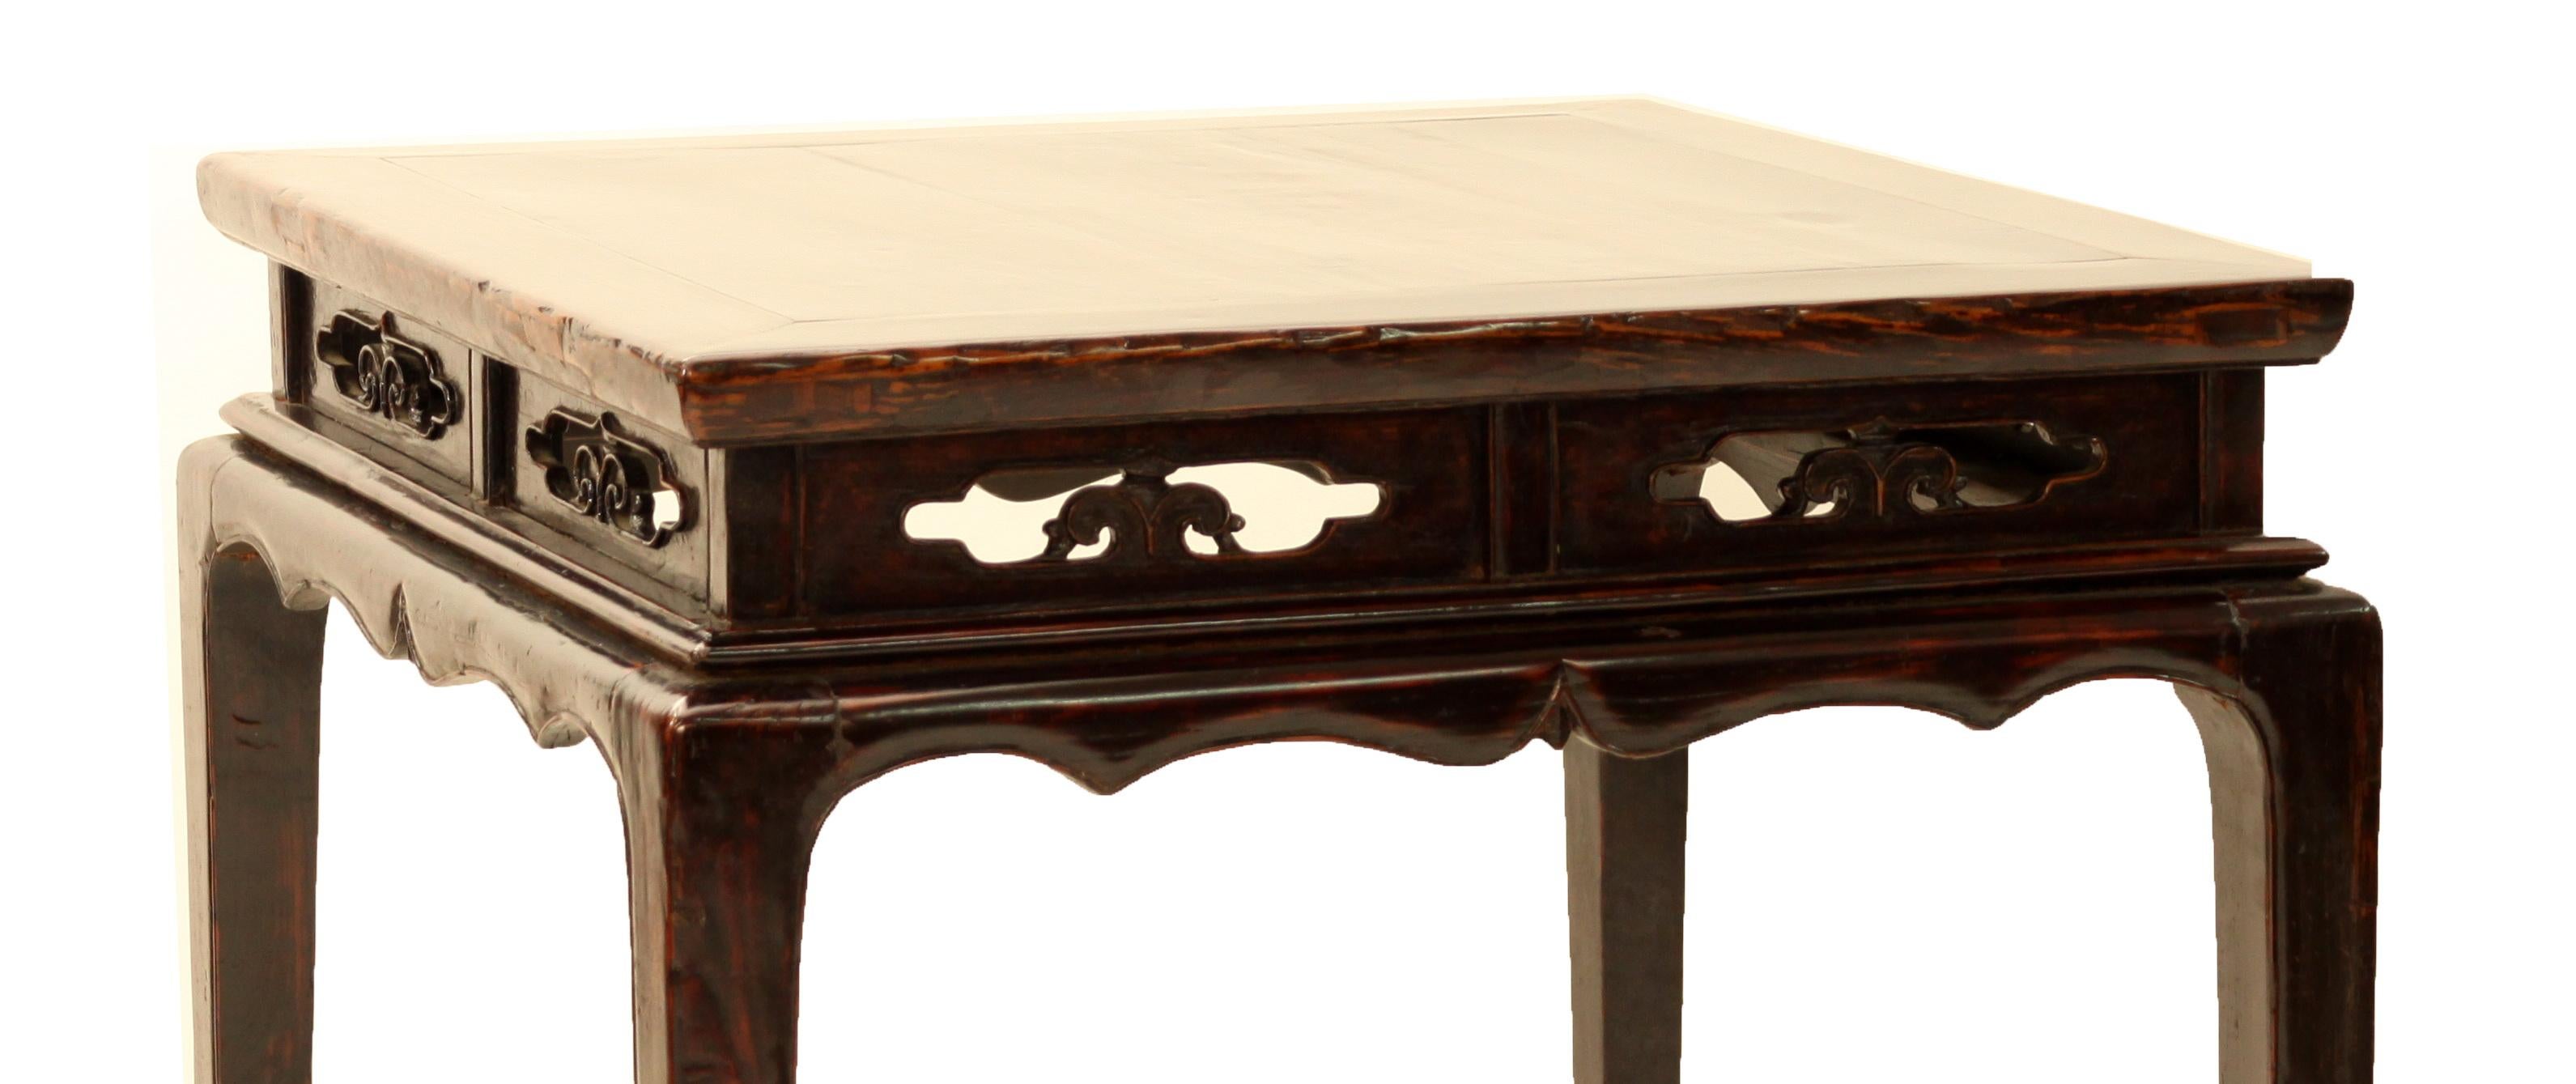 Superb incense table

The floating top panel enclosed with a frame with an ice-plate edge, above a high waist pierced with open cartouches decorated with carved foliage and cusped curvilinear apron, supported on straight corner legs ending in